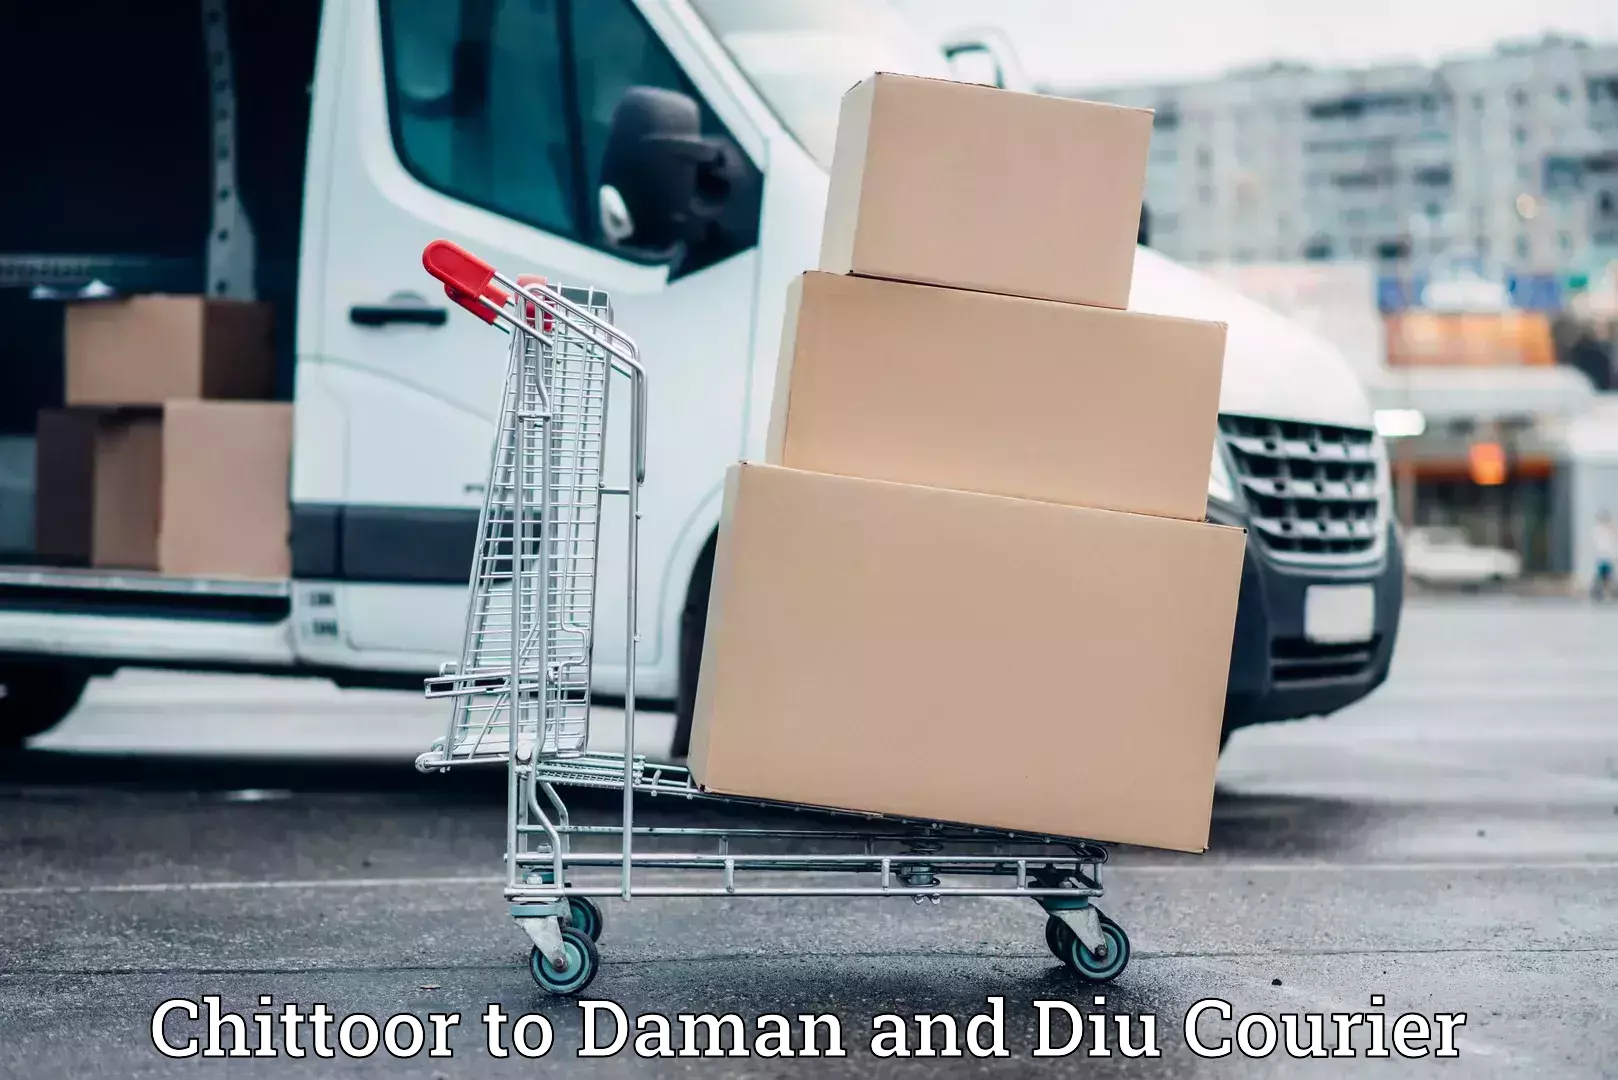 Furniture transport specialists Chittoor to Daman